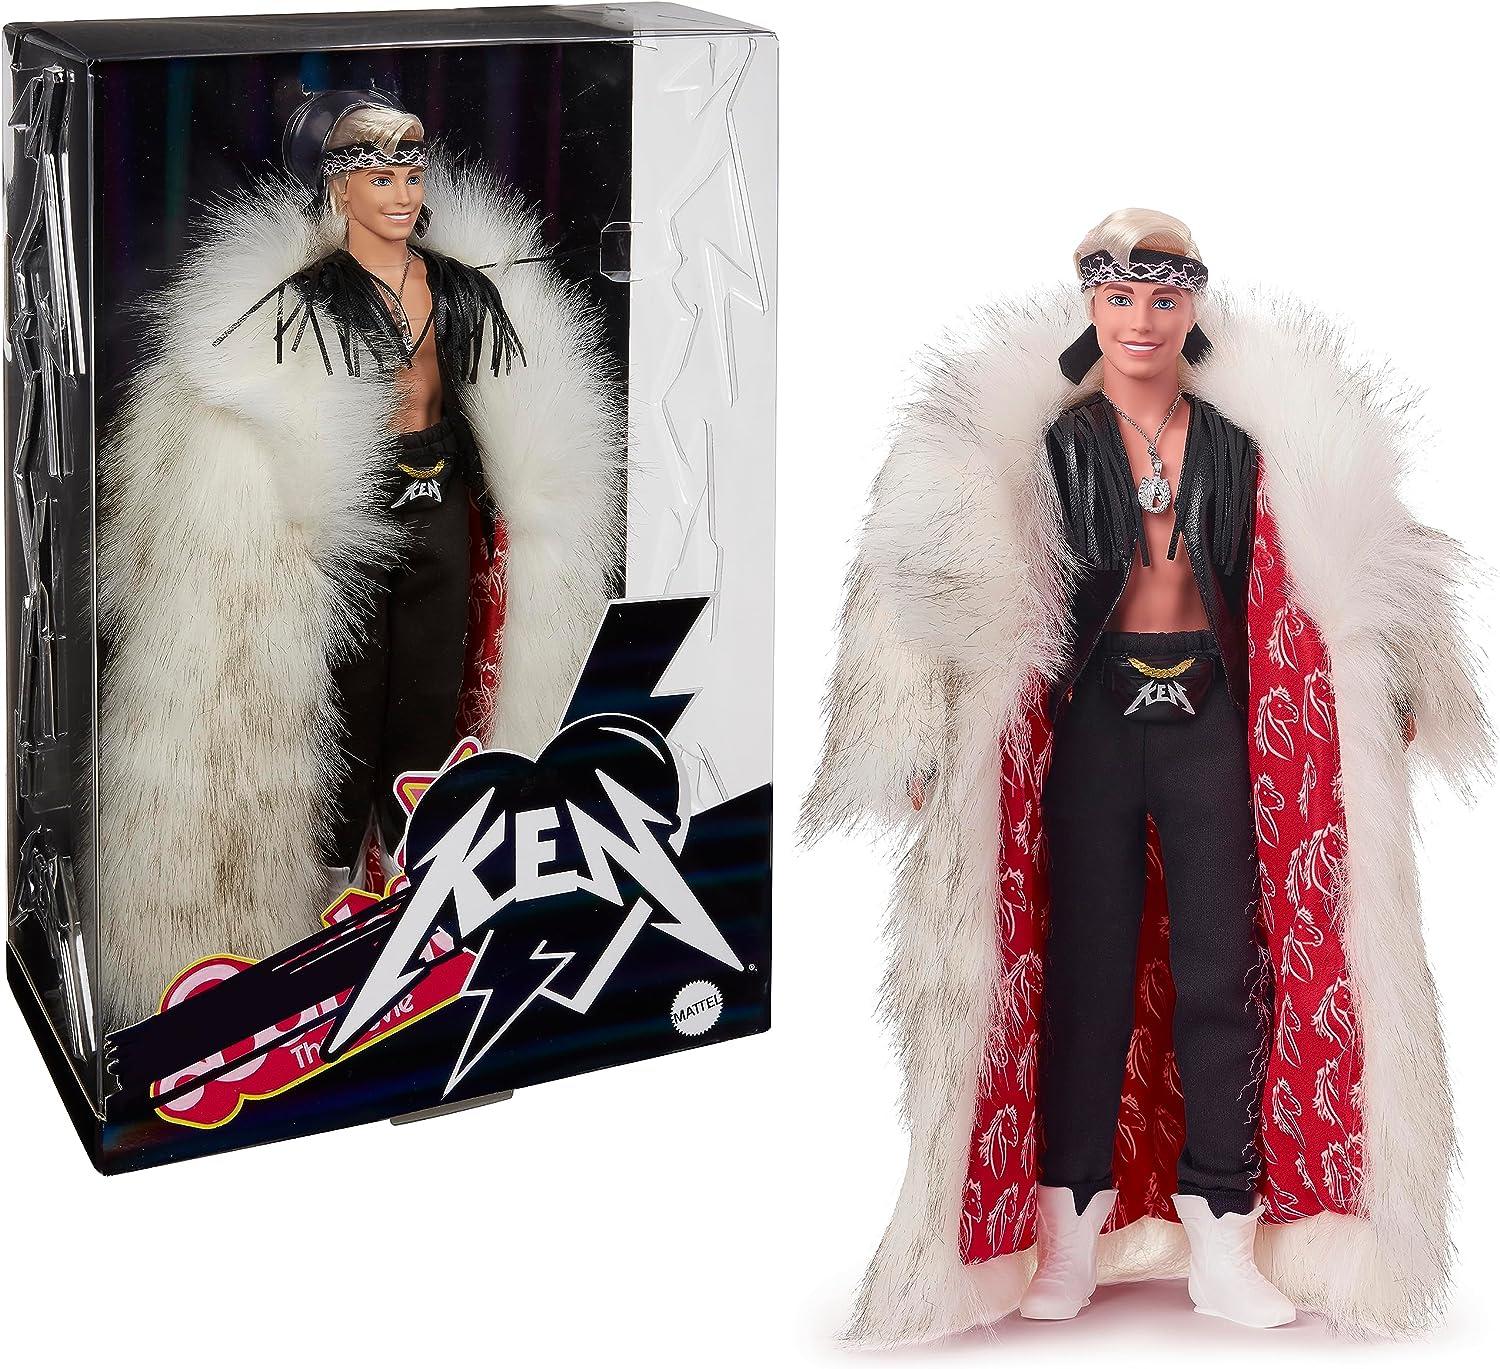 Barbie” star Simu Liu now has his own Ken doll and fans are split